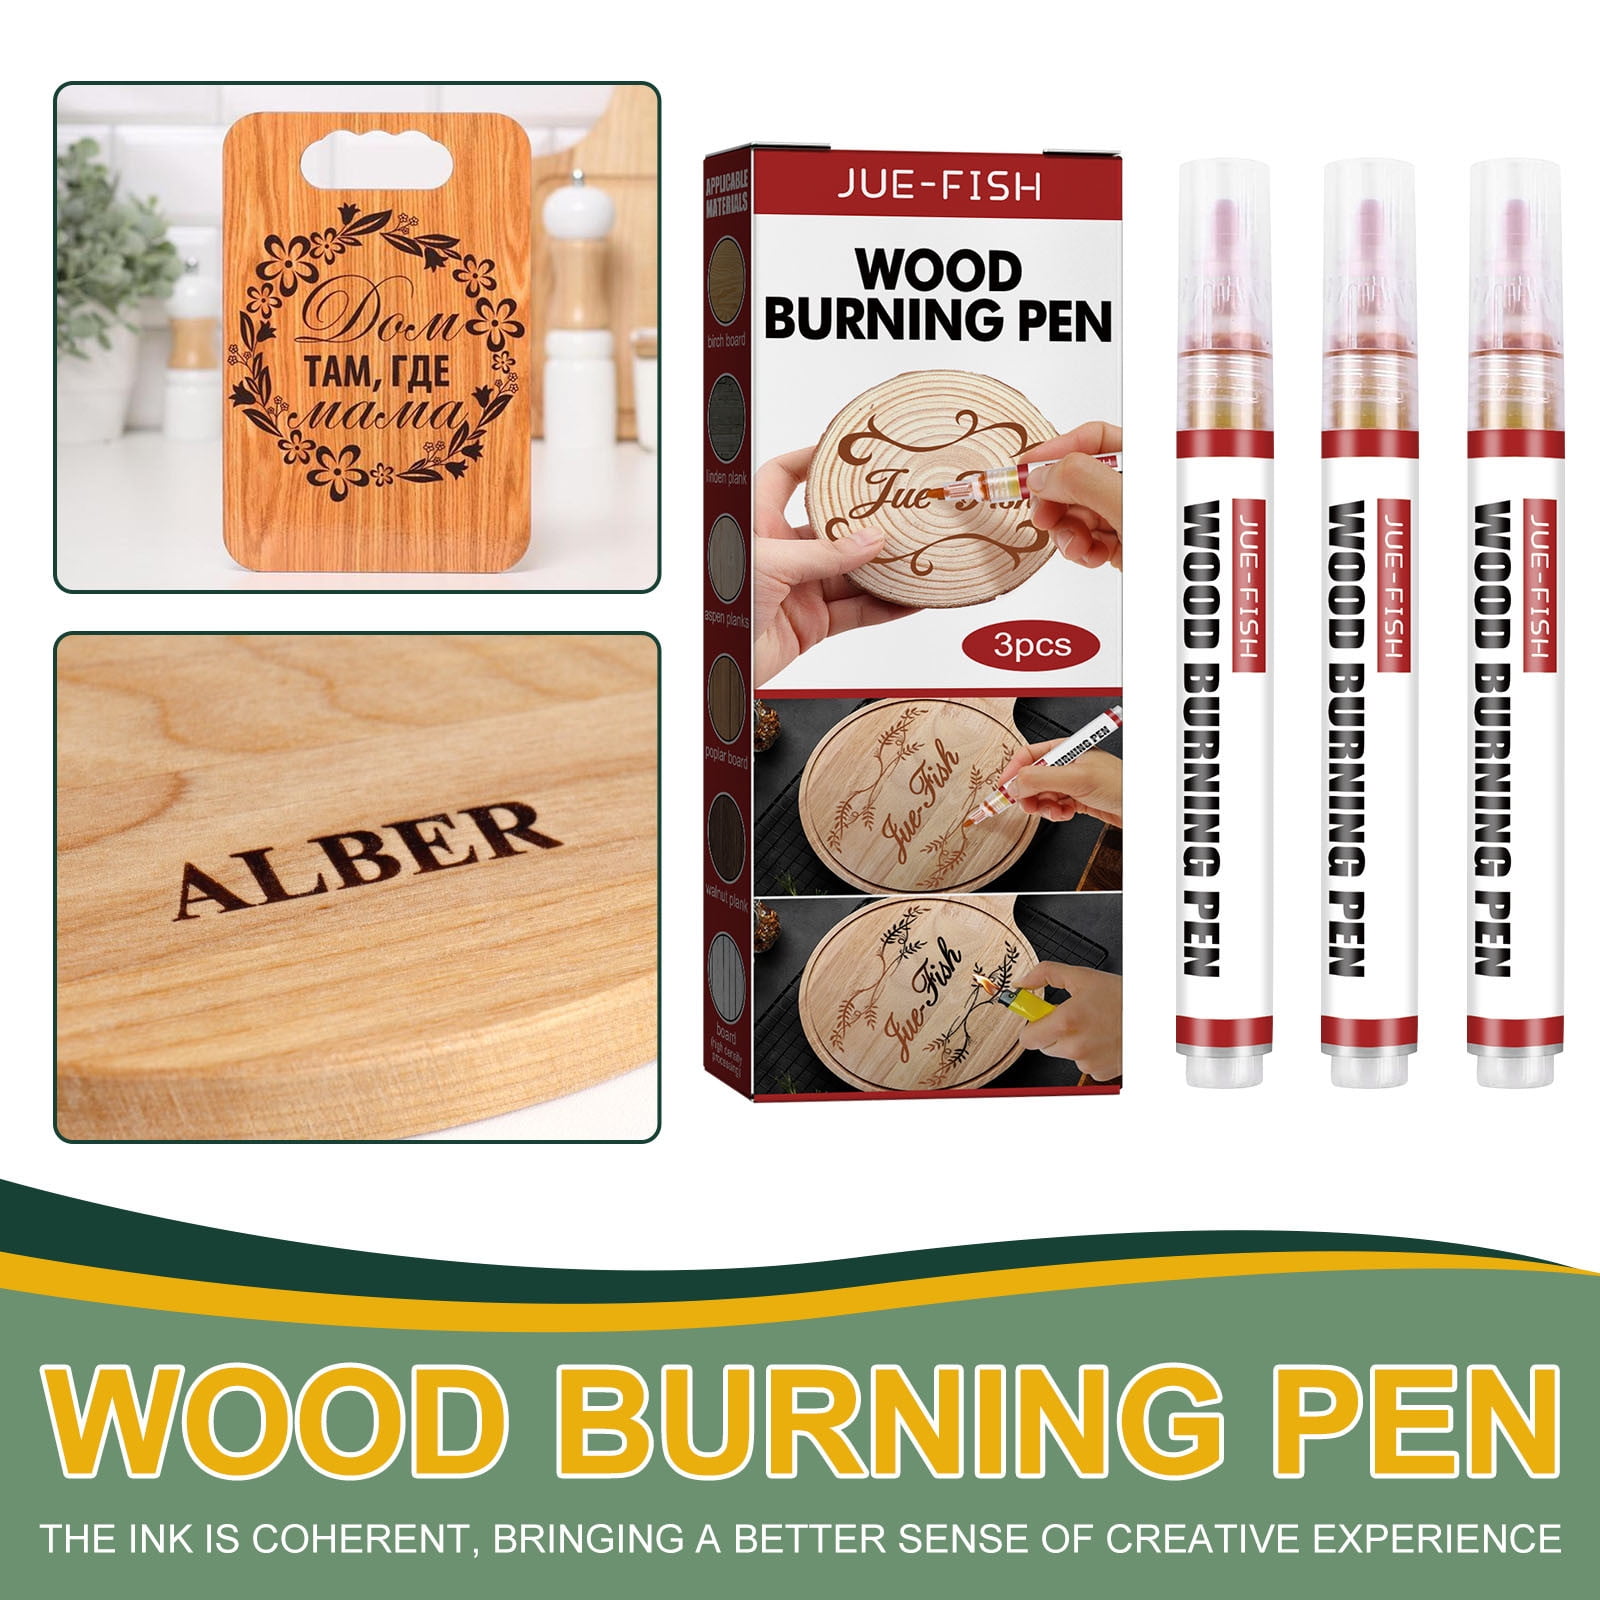  SUIUBUY Scorch Pen Marker - 2 PCS Wood Burning Pen Tool with  Replacement Tip, Chemical Wood Burner Set for Burning Wood, Do-it-Yourself  Kit for Arts and Crafts : Arts, Crafts